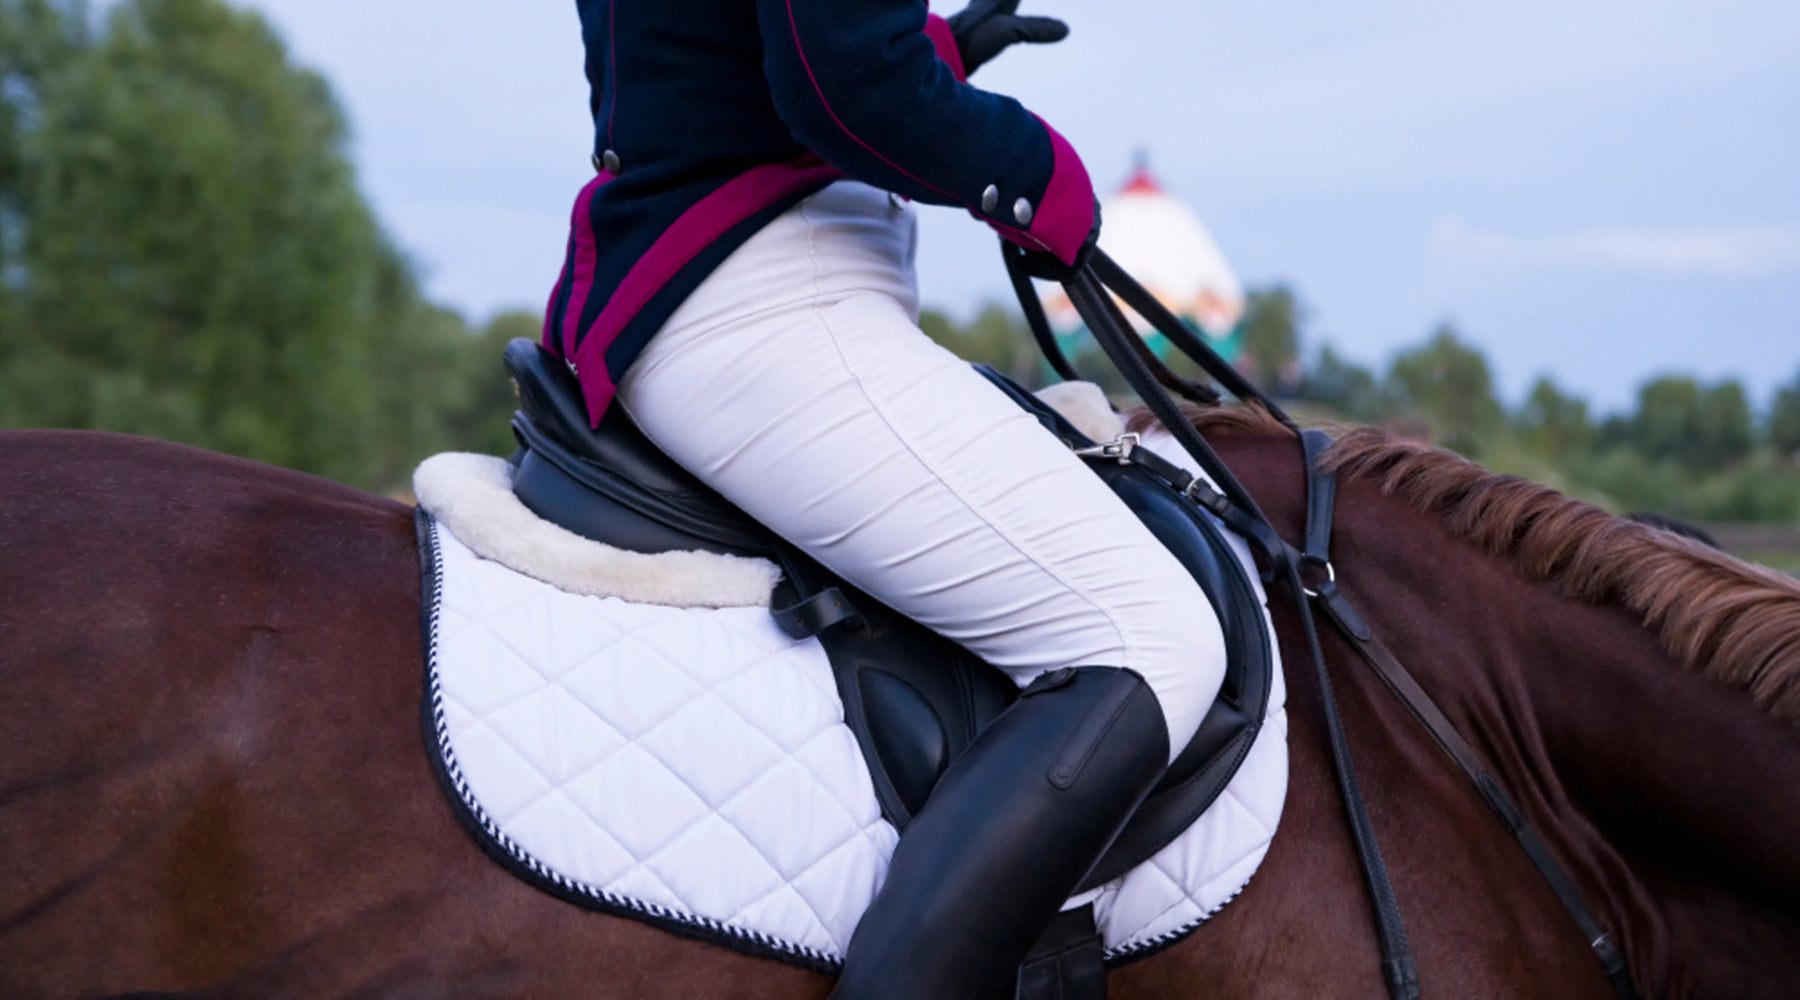 The difference between riding breeches and riding tights